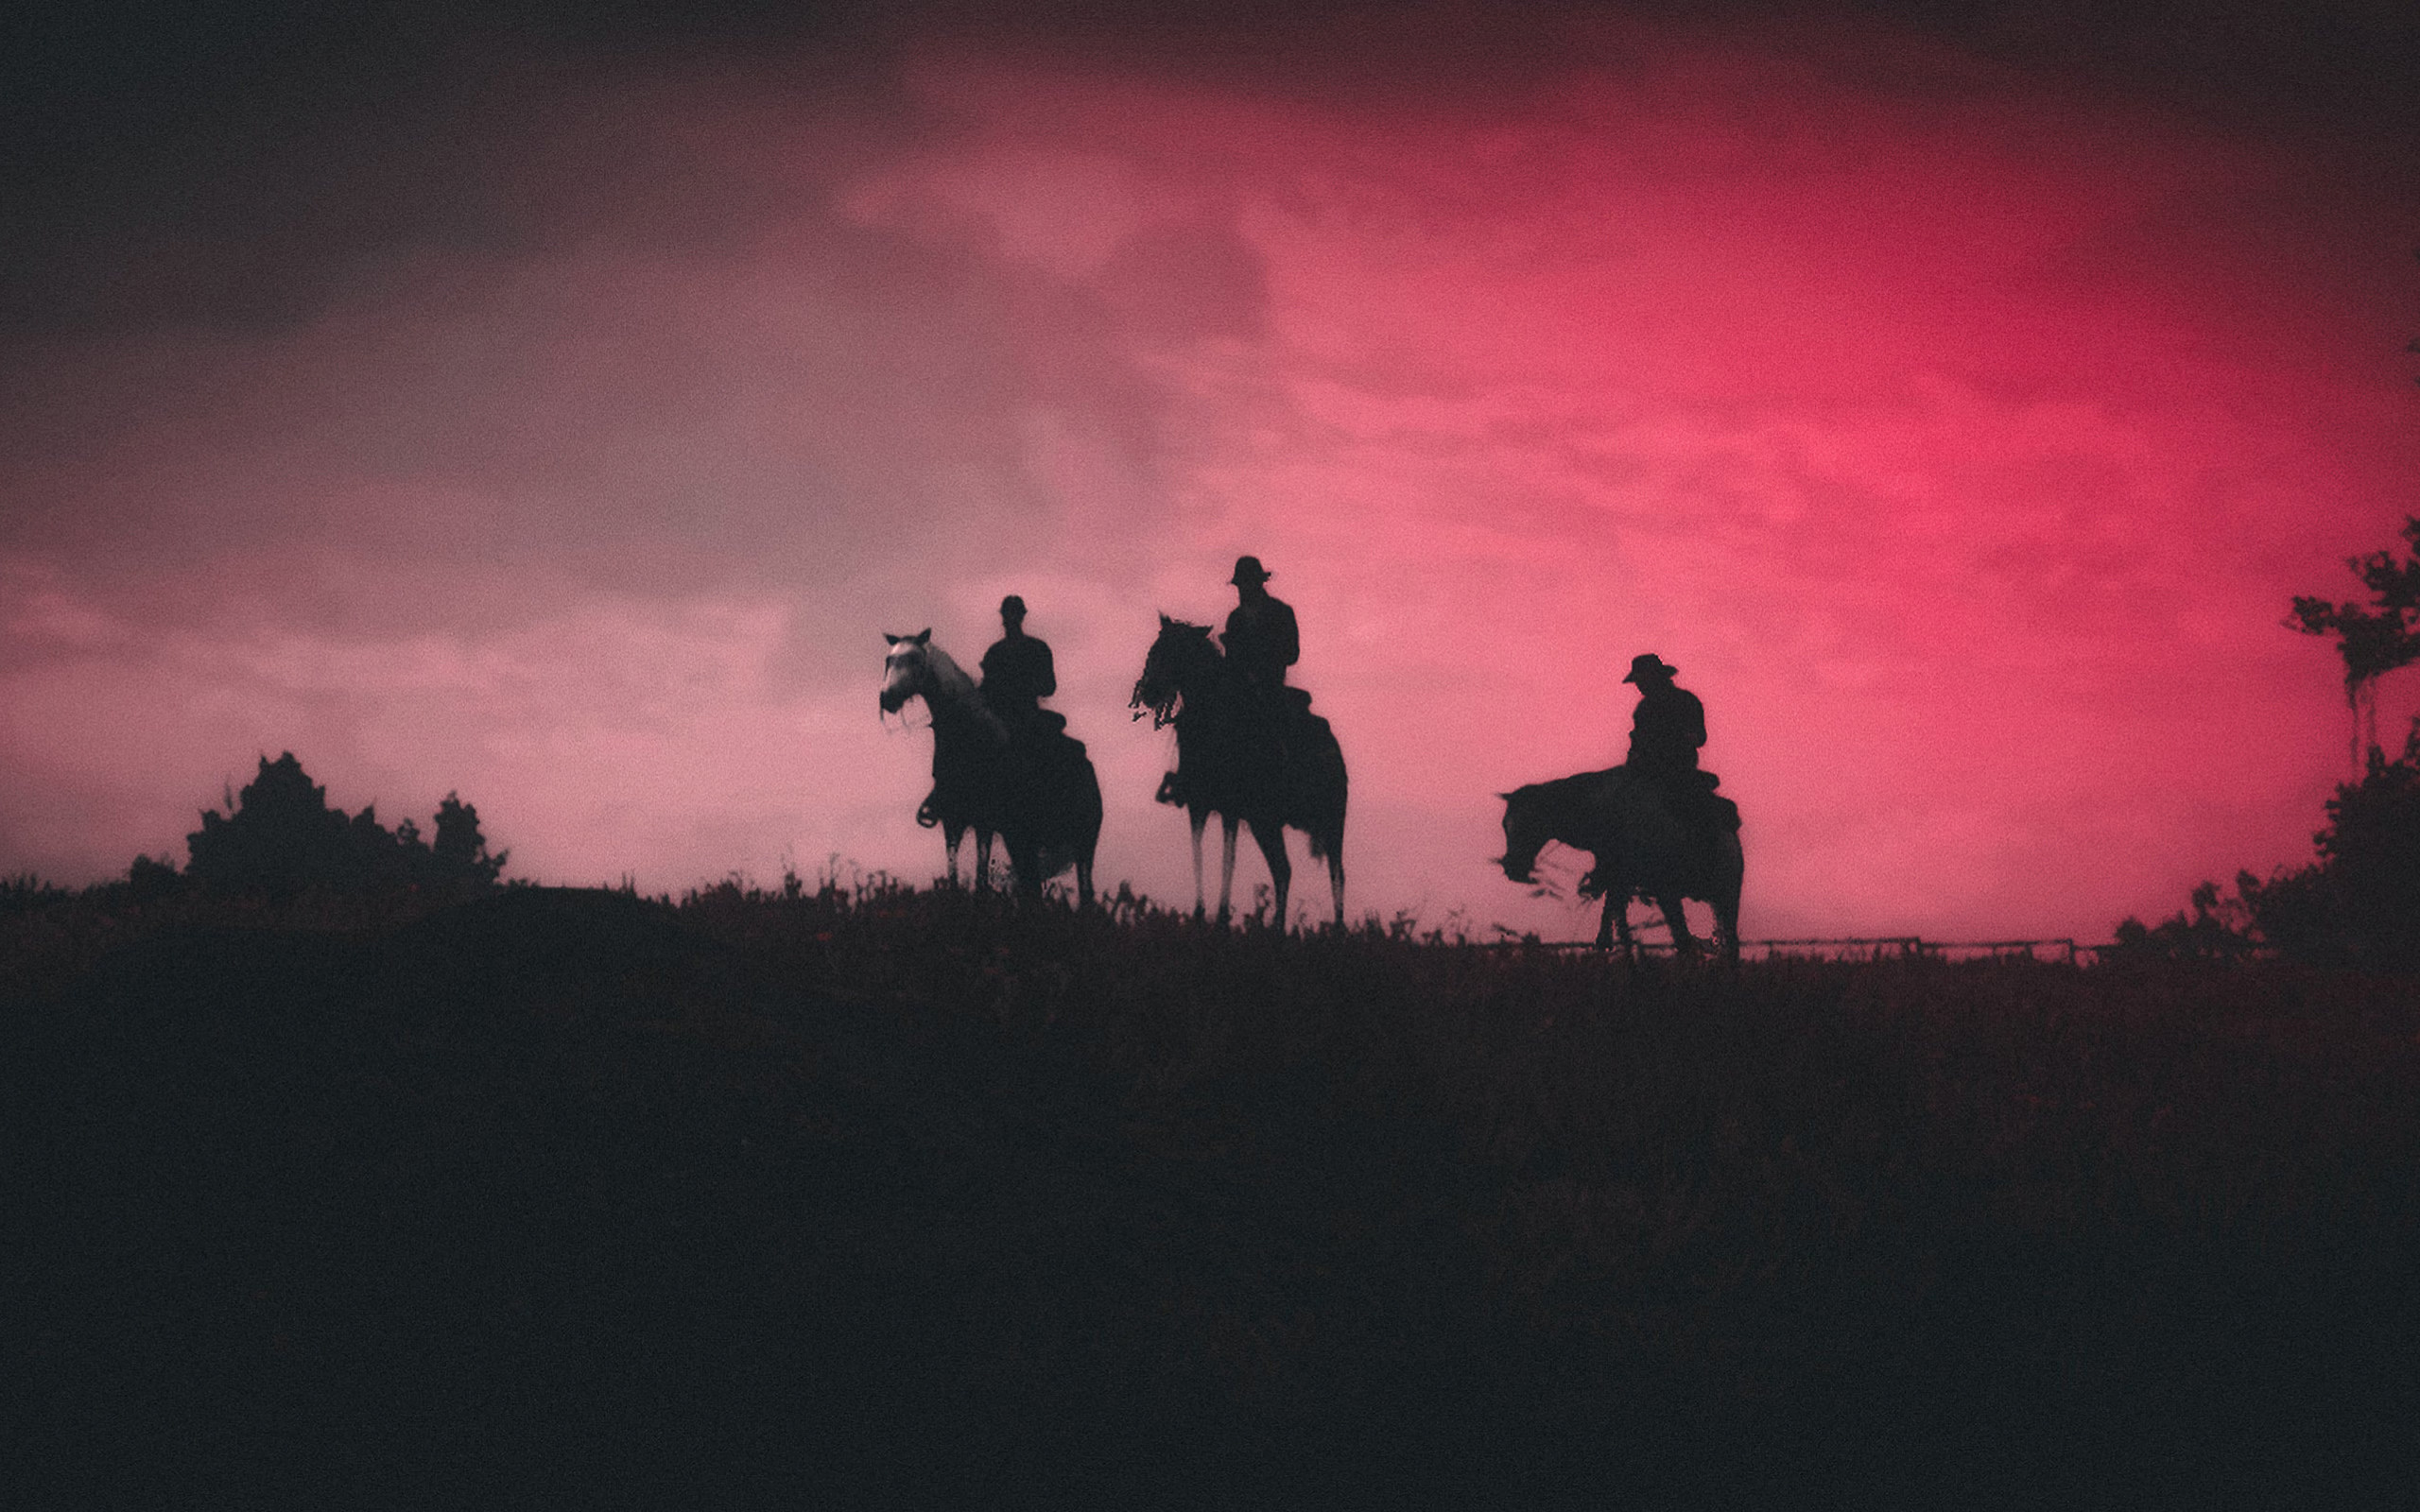 Download wallpaper 2560x1600 red dead redemption 2, silhouette, video game,  2019, dual wide 16:10 2560x1600 hd background, 22161